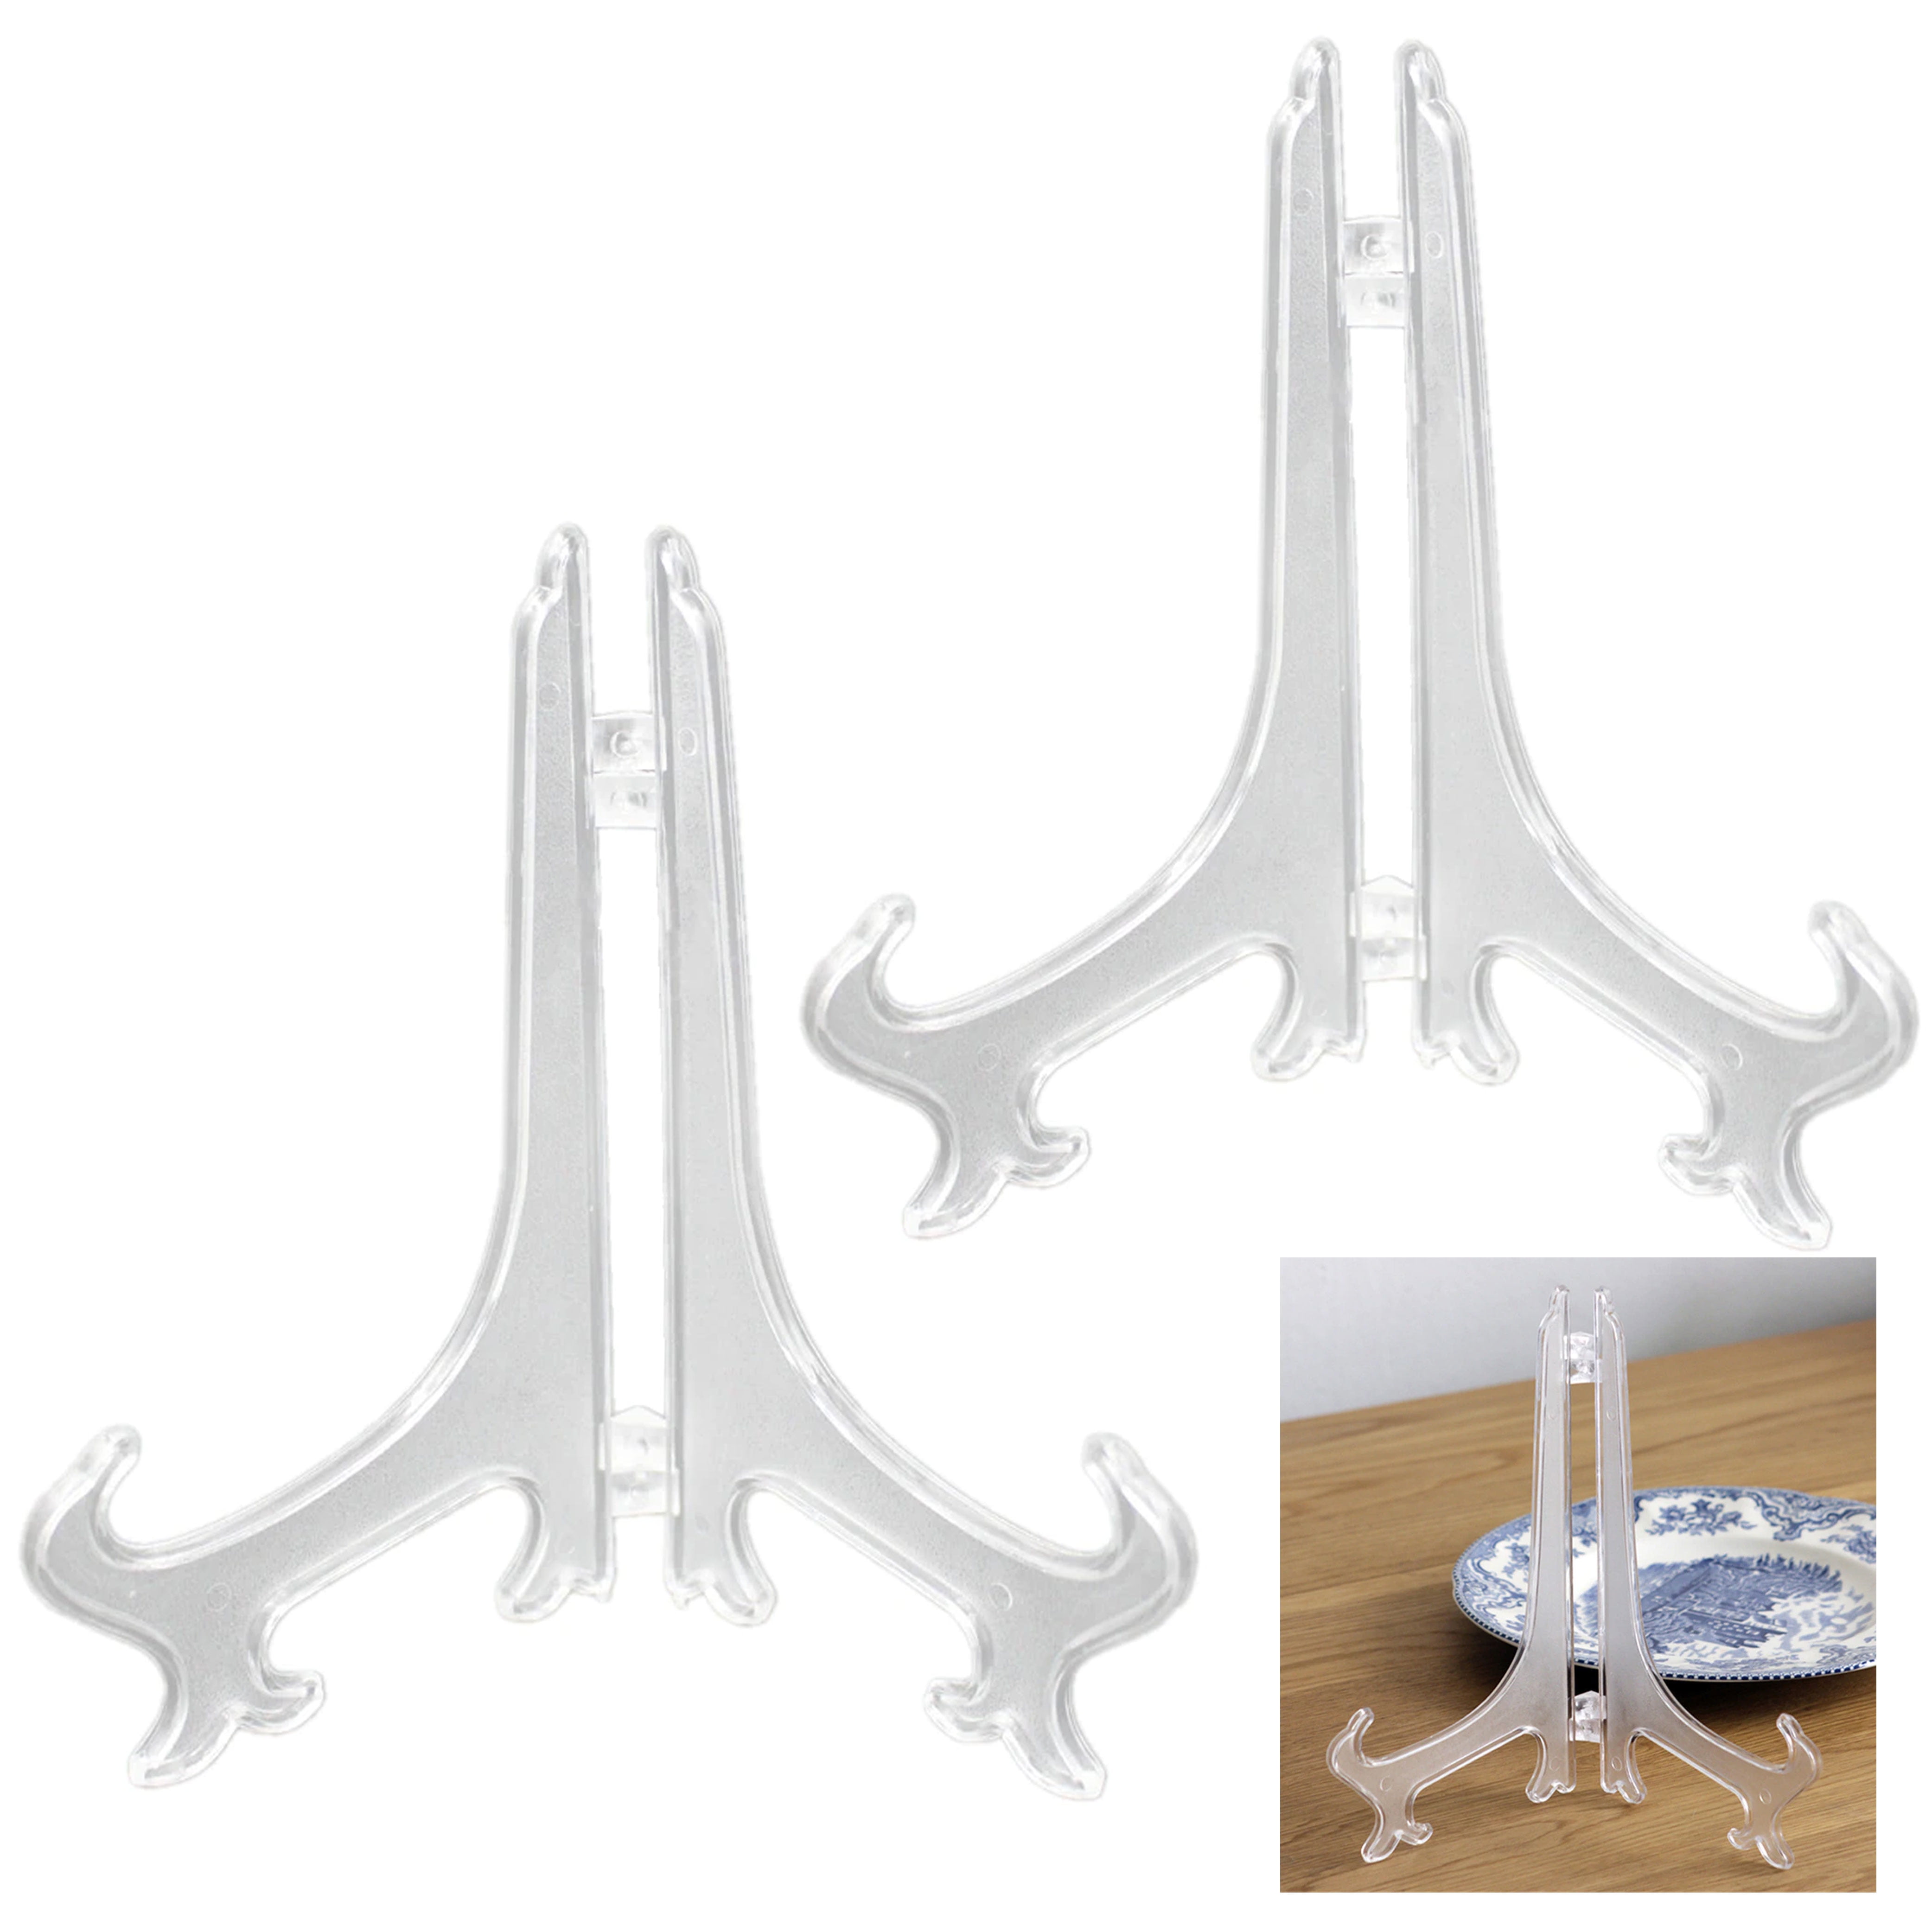 10pcs 10 Inch Dish Holder Folding Plate Bracket Display Stand for Home Decors 